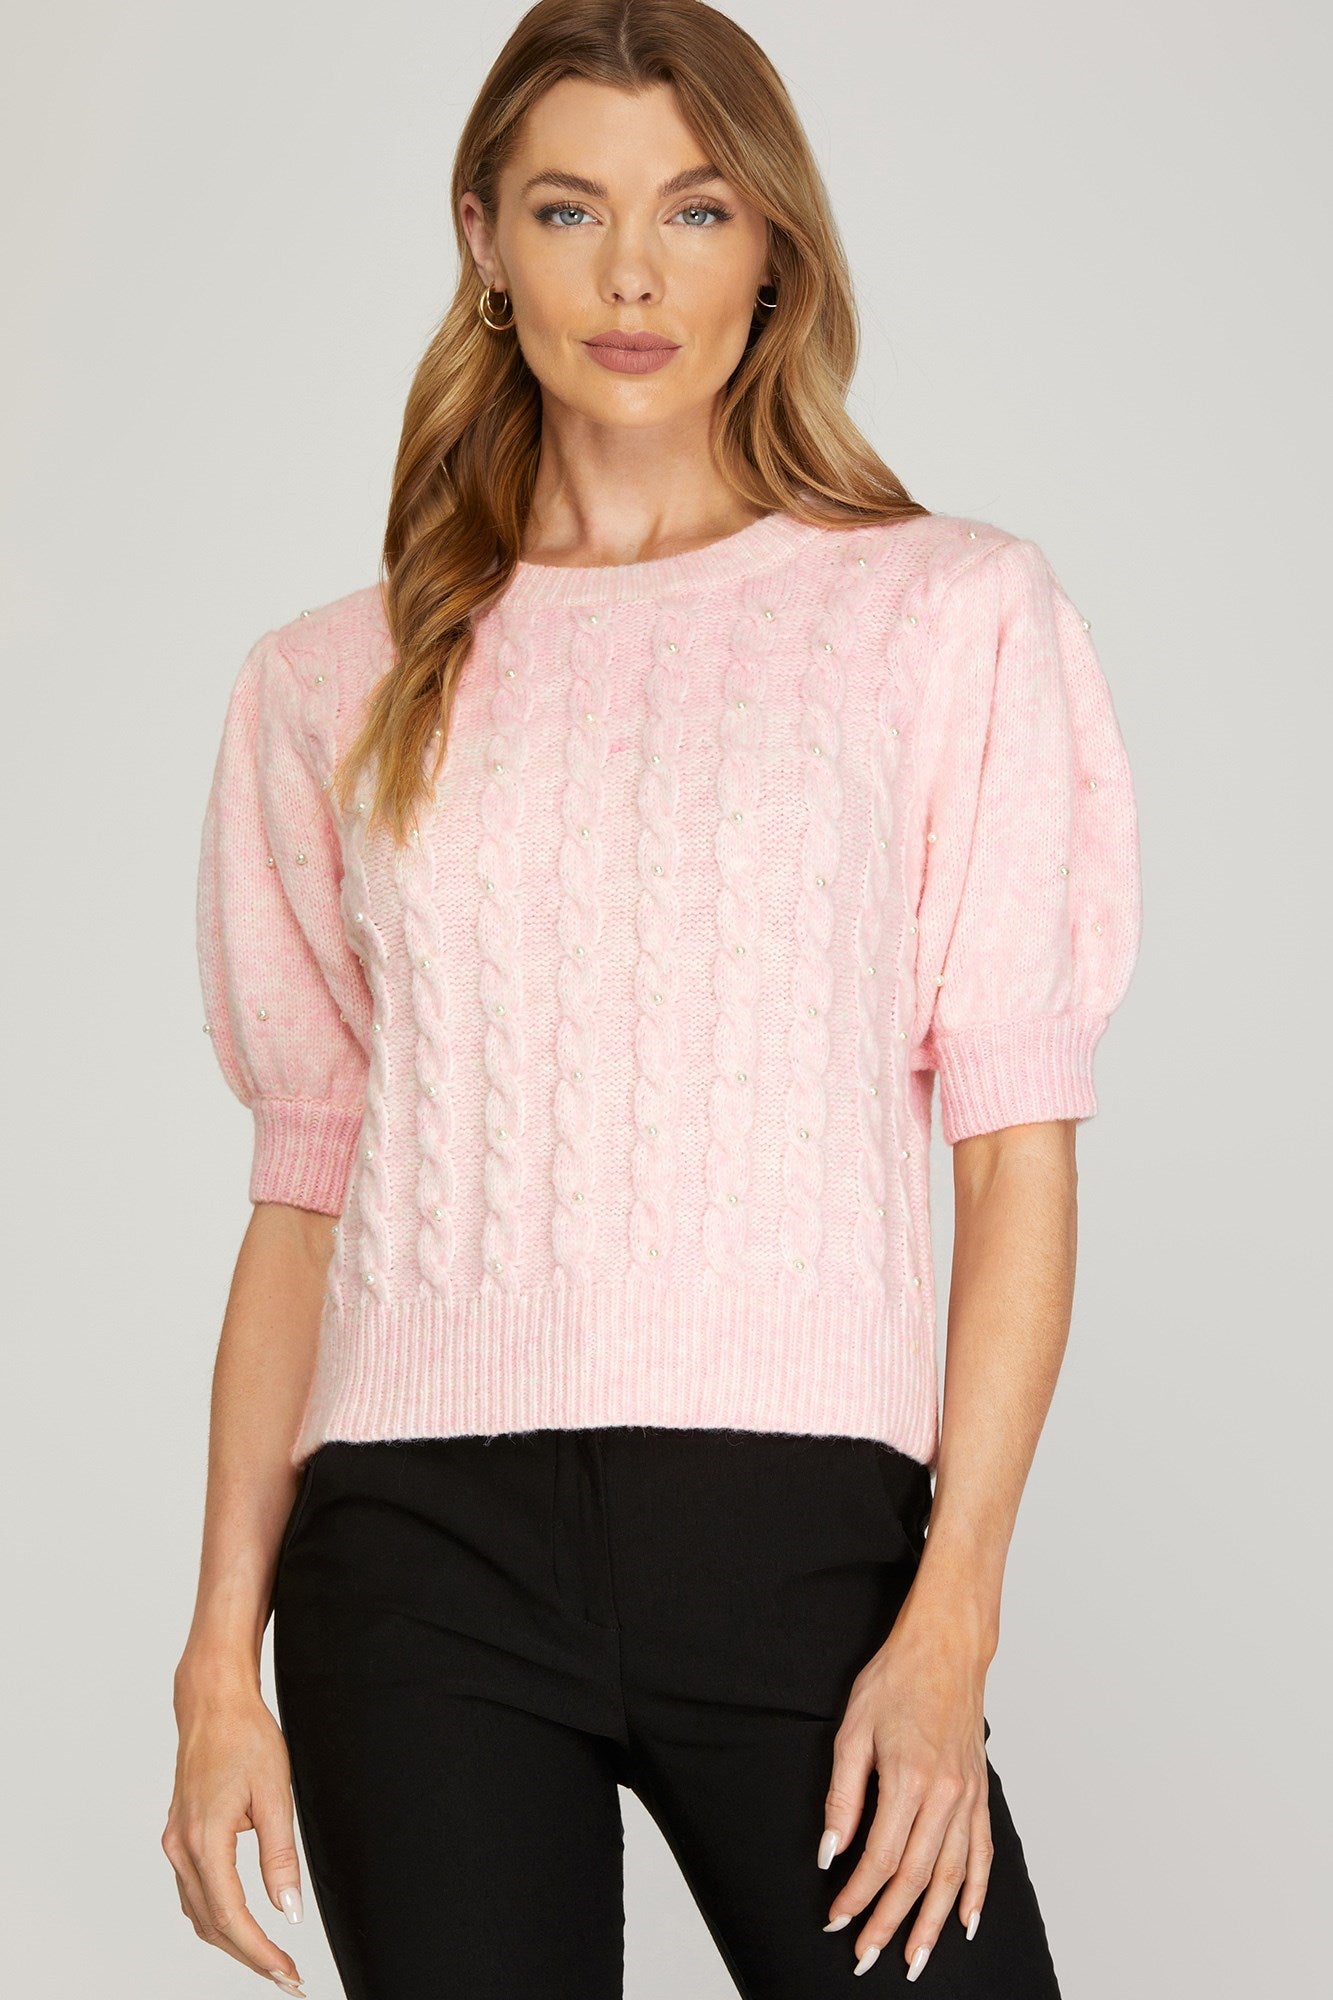 Sale Puff Sleeve Cable Knit Sweater w/Pearls